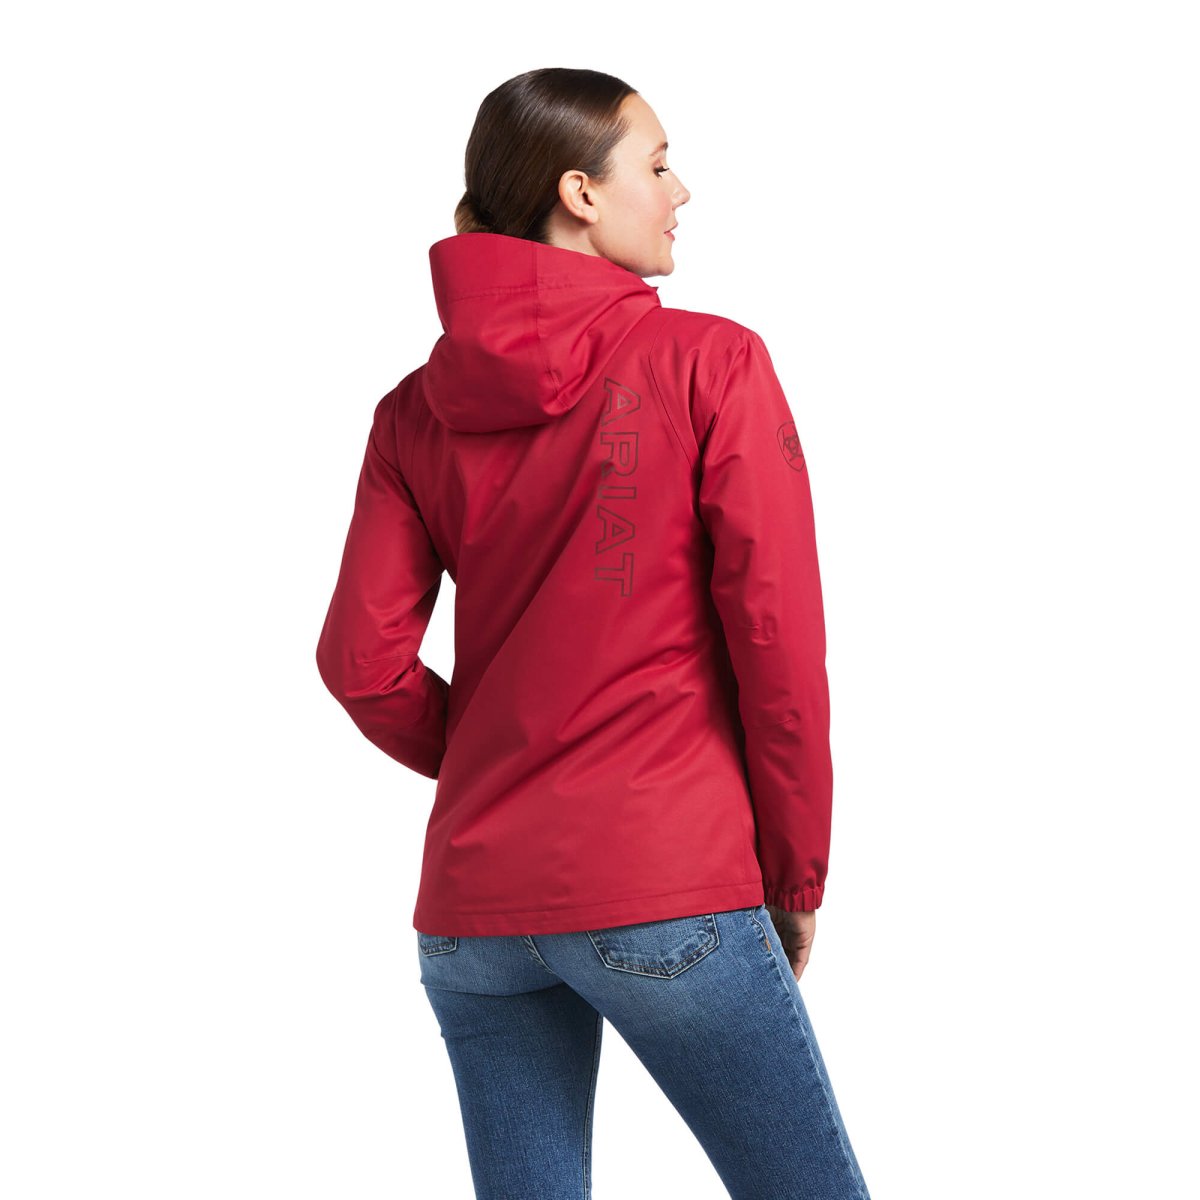 Ariat Womens Spectator Waterproof Jacket - Red Bud - Extra Small